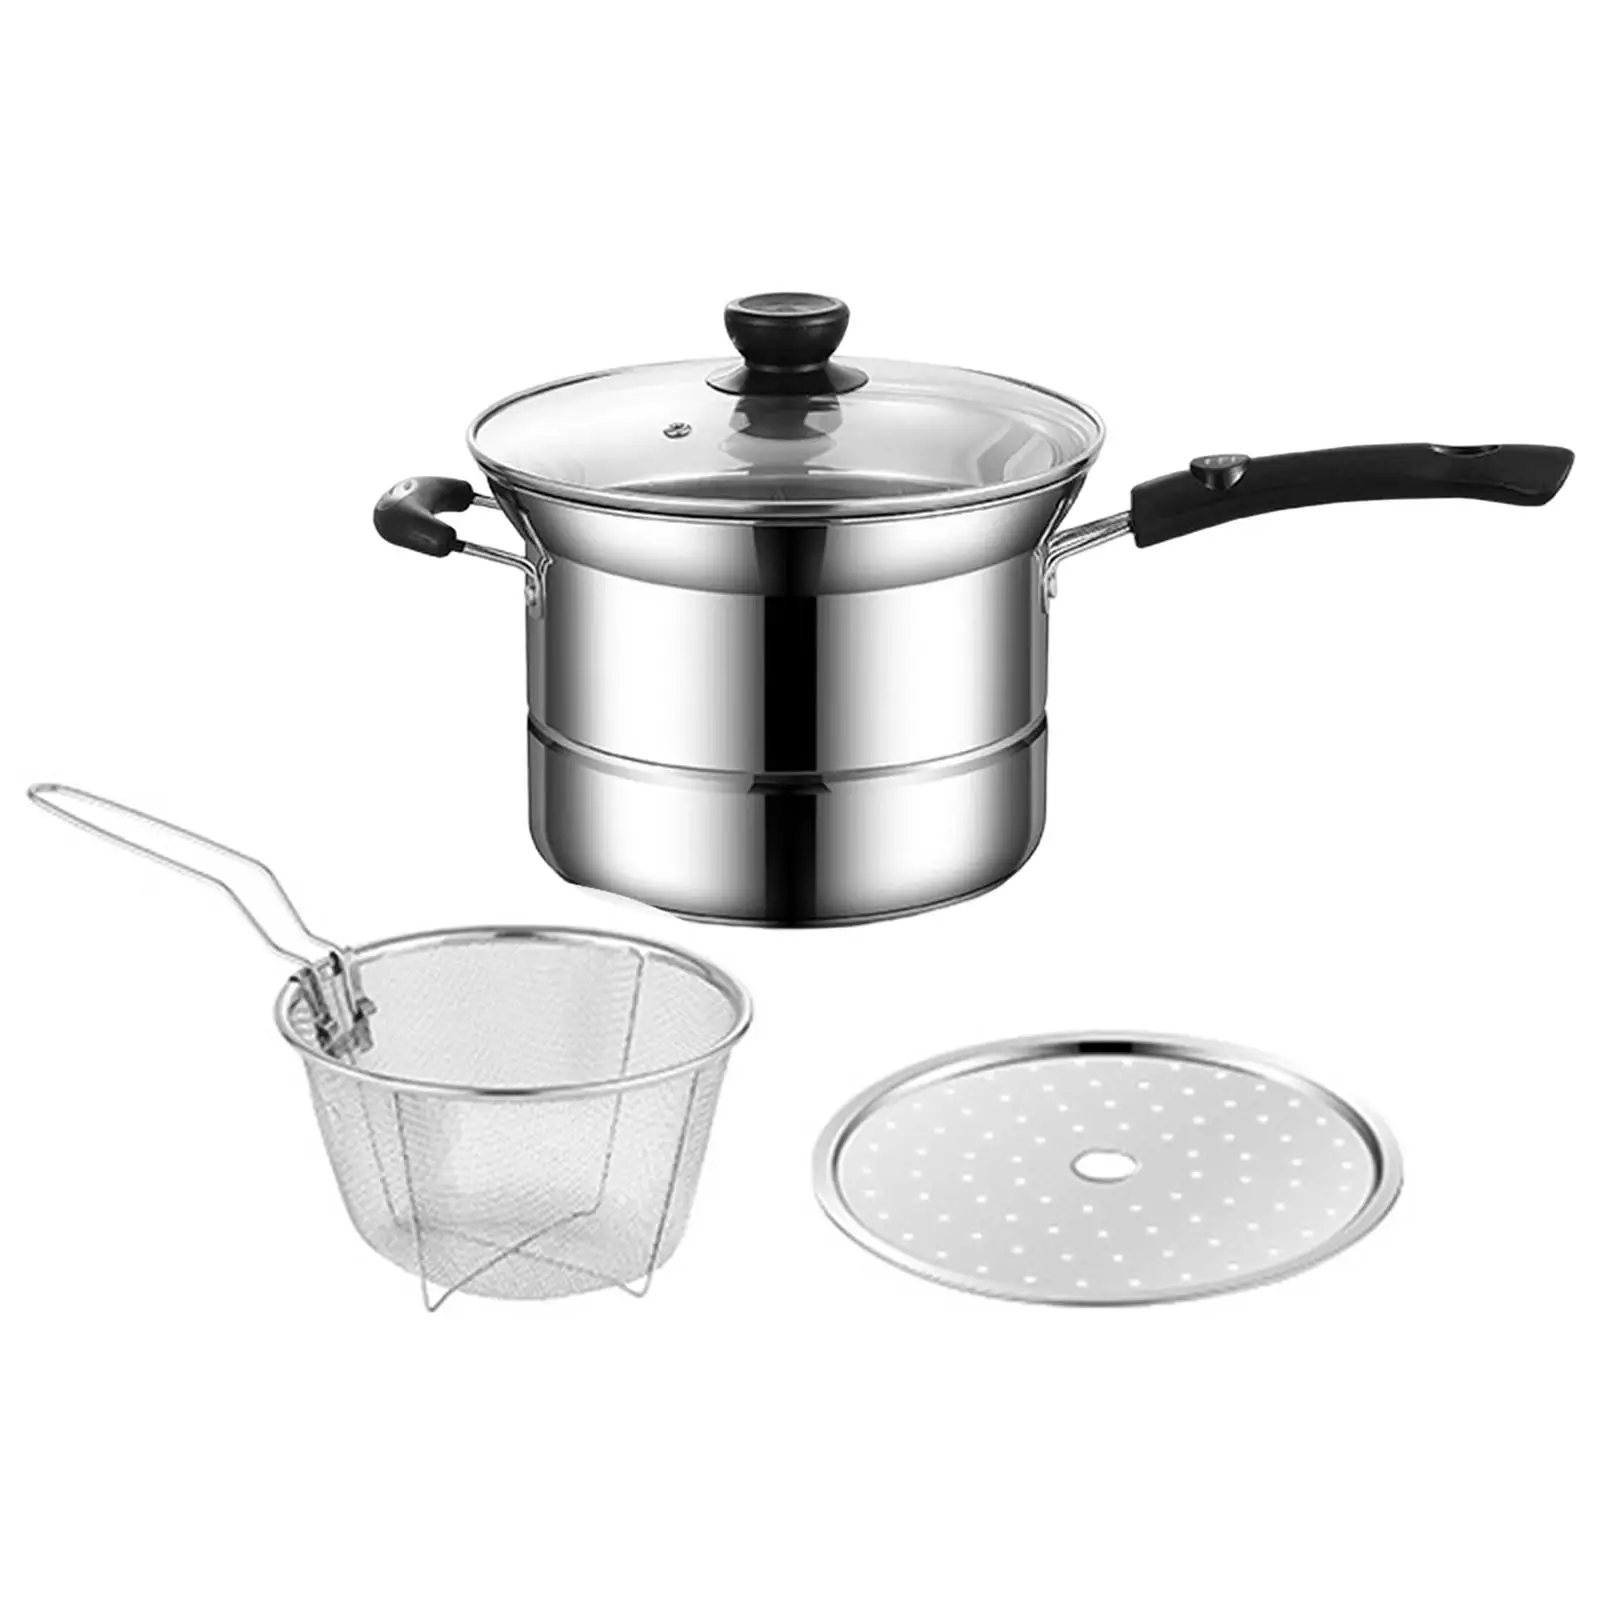 Stainless Steel Sauce Pan Milk Pot Multipurpose Cookware Sets Utensils Universal Small Pot for Camping Dining Room Picnic